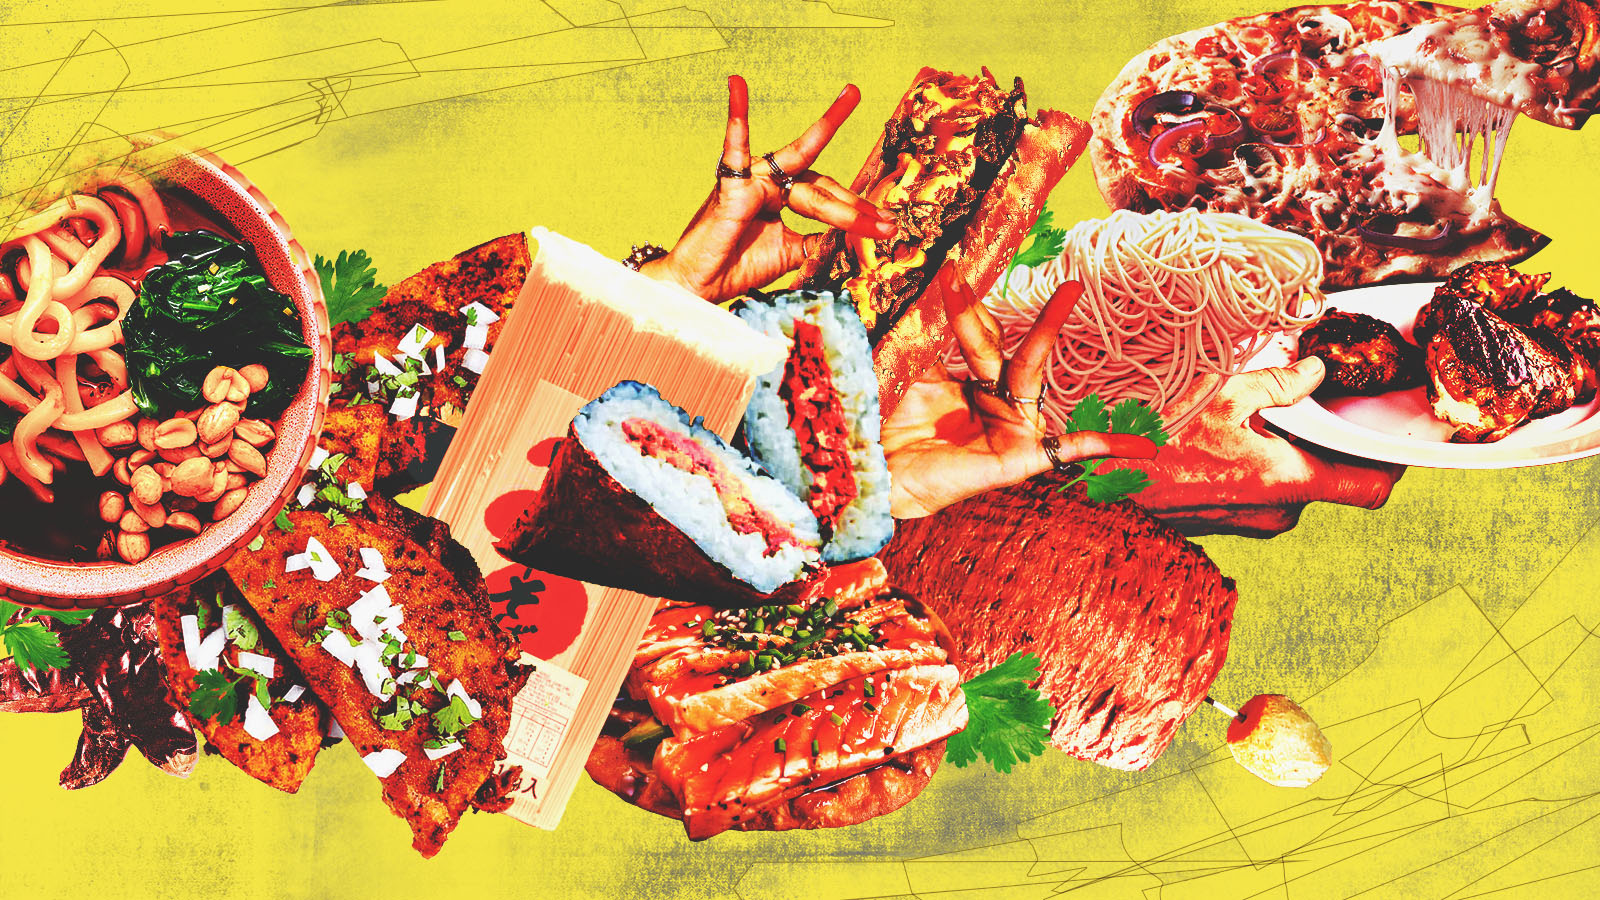 Photo-collage of various different kinds of food — pizza, spaghetti, salmon, tacos among them — all jumbled together.